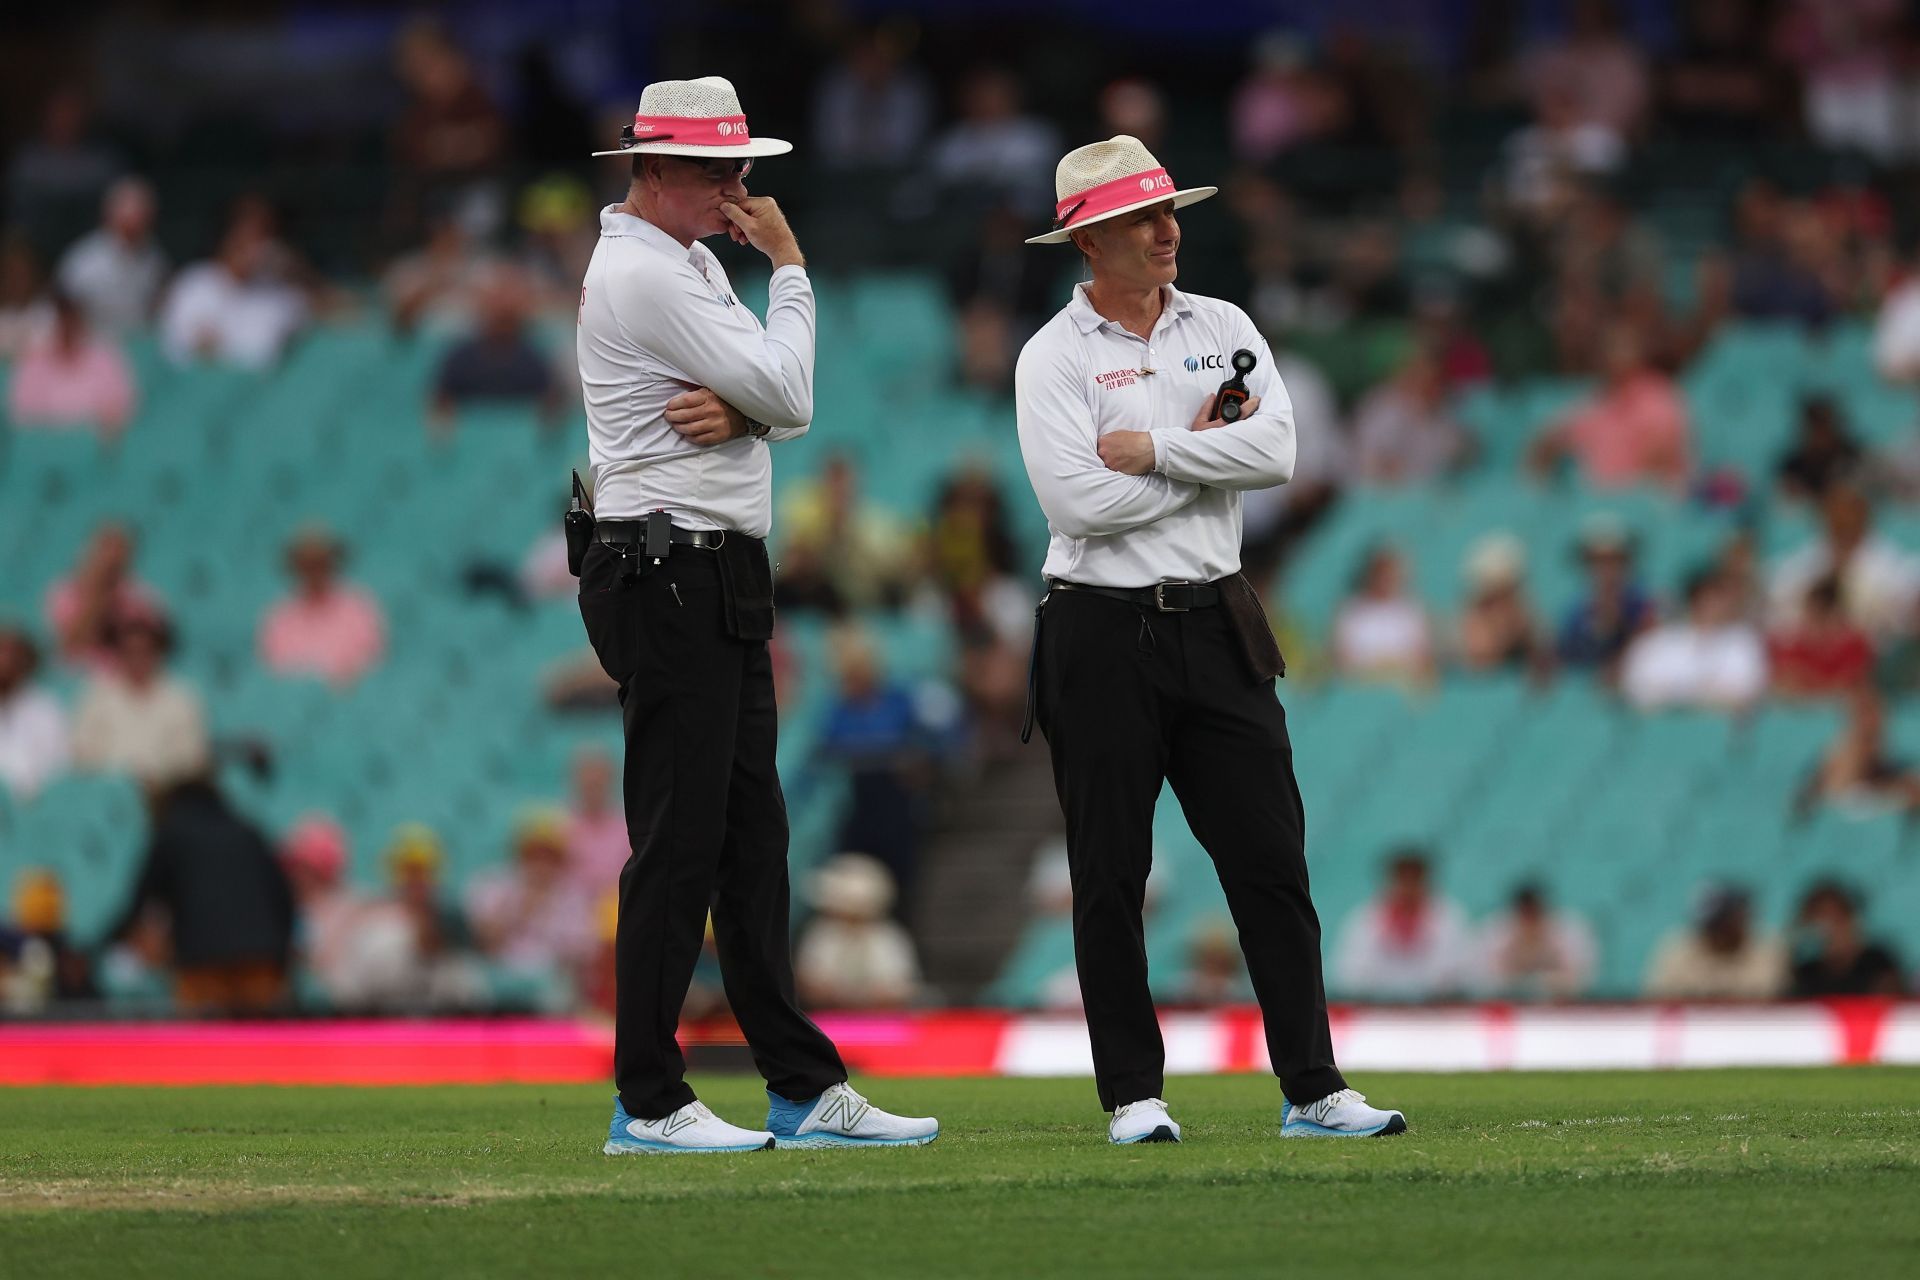 Umpires inspect conditions at the SCG. (Credits: Getty)